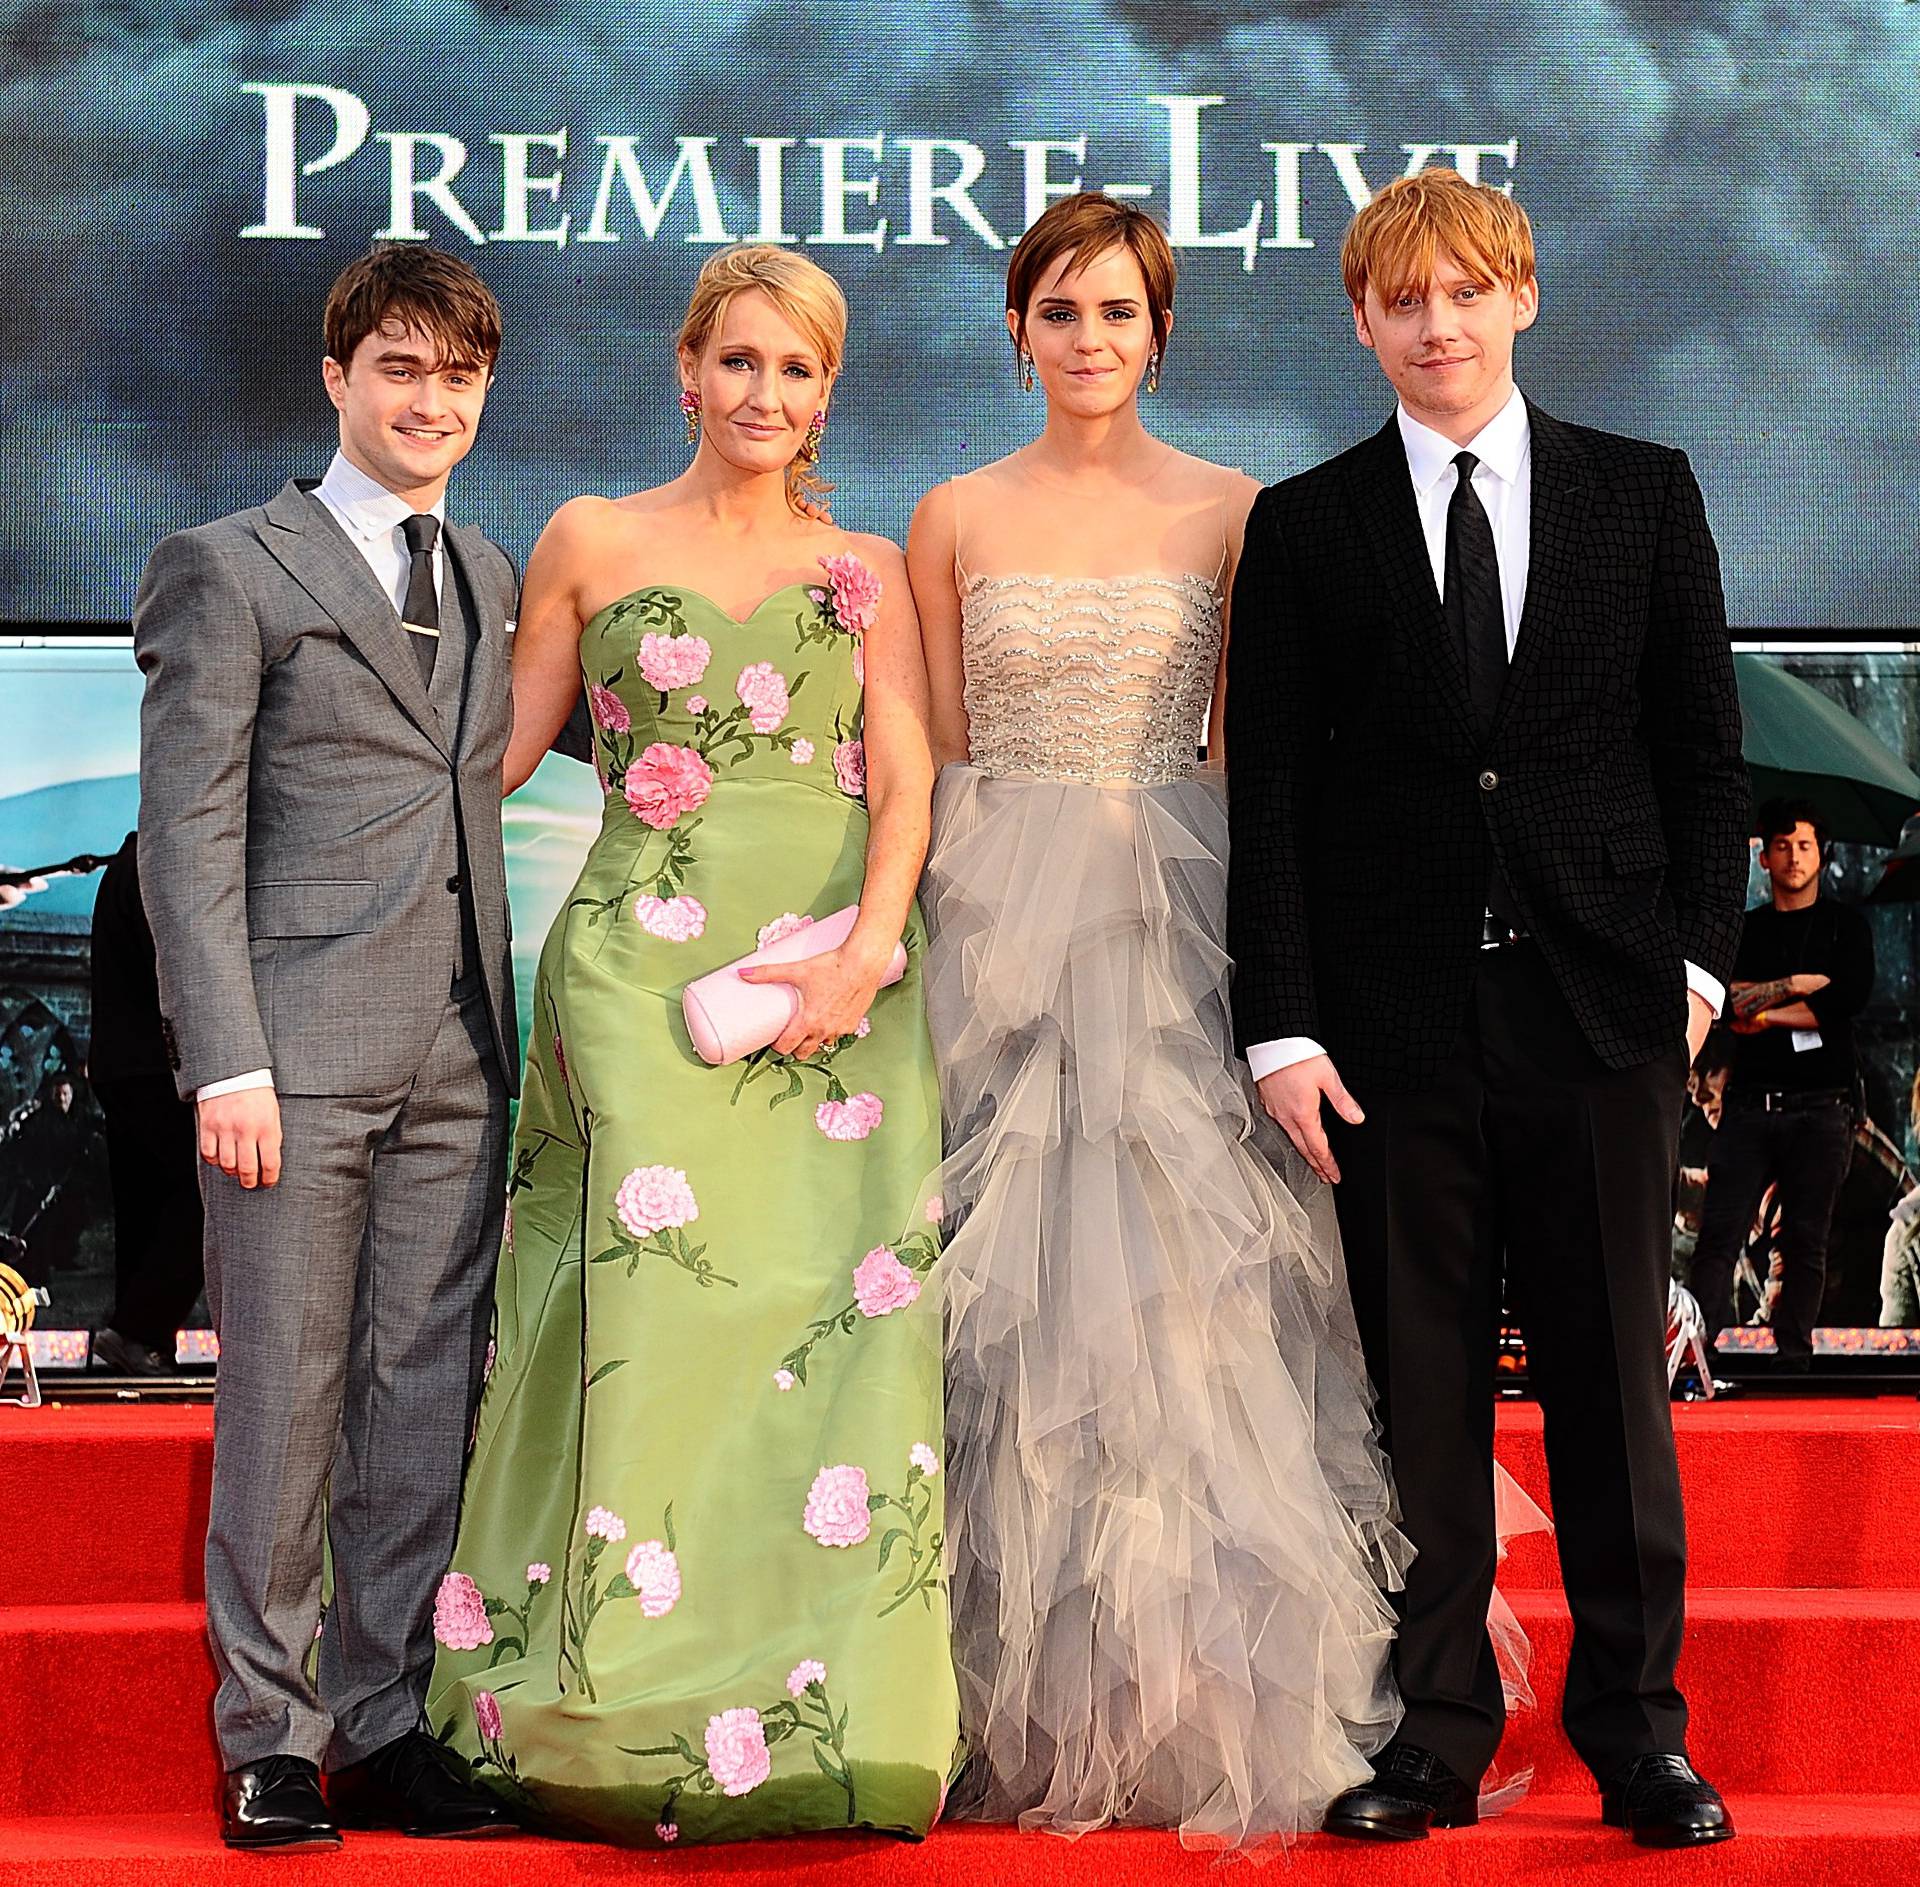 Harry Potter And The Deathly Hallows: Part 2 UK Film Premiere - London